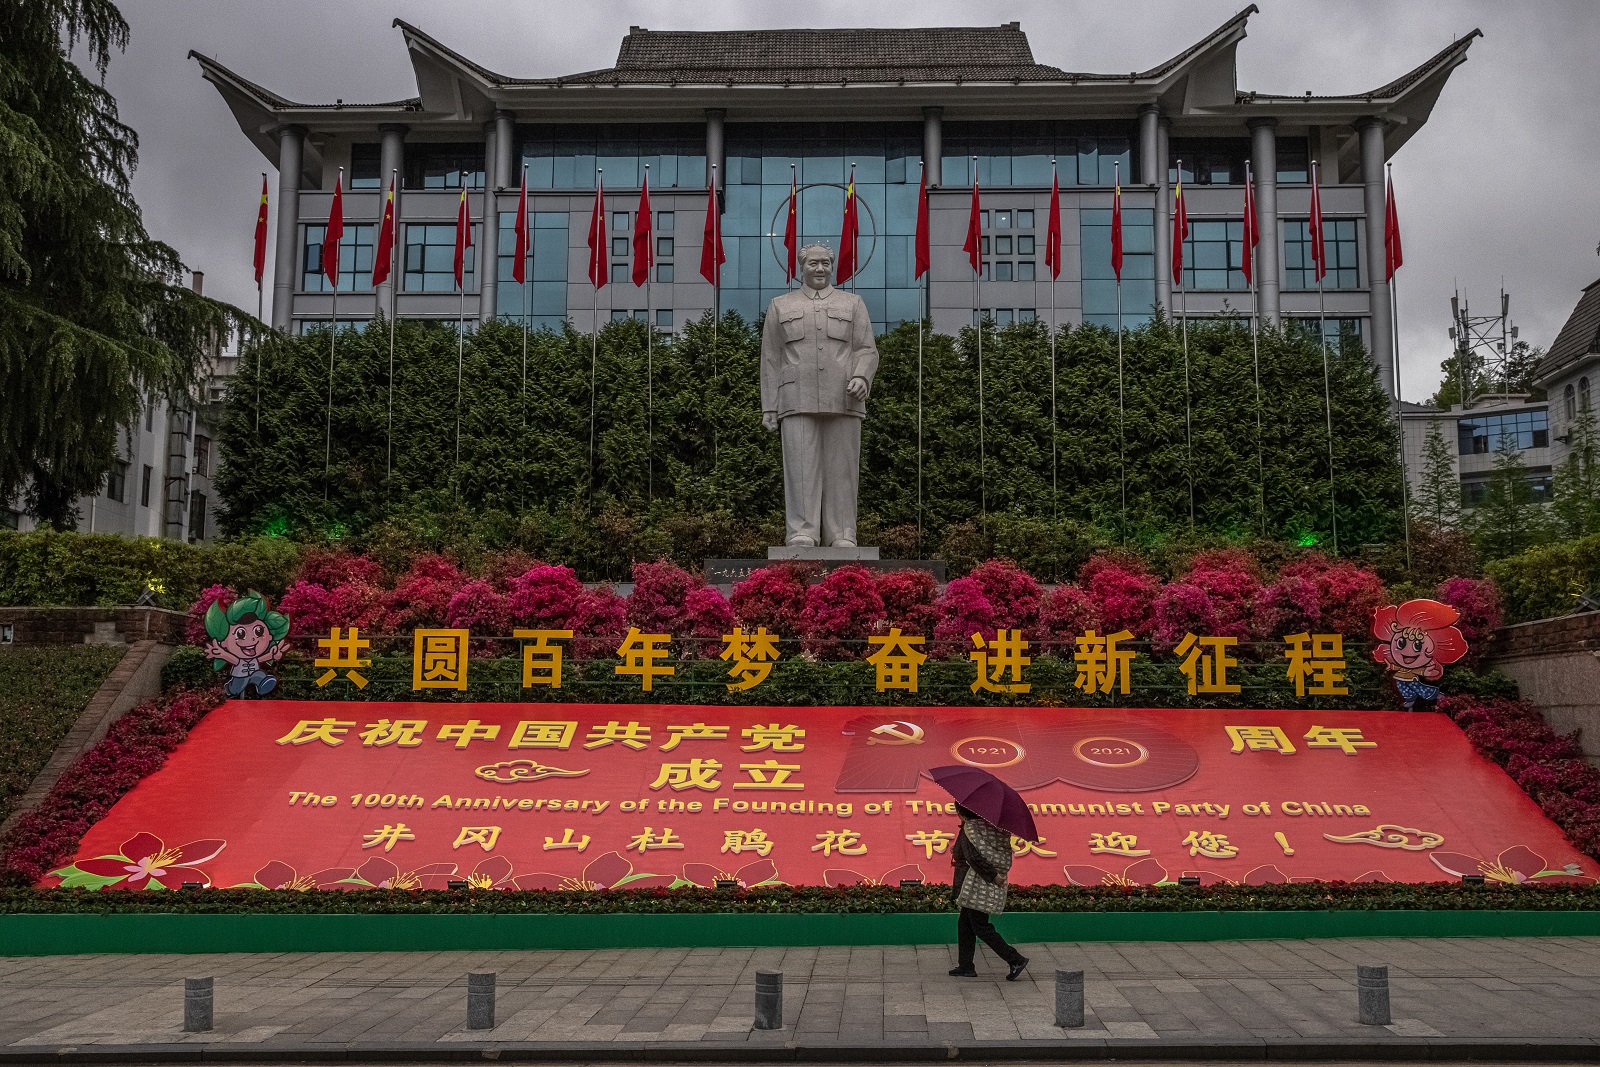 epa09240189 (19/28) A person walks past a statue of Mao Zedong and a banner reminding of the upcoming 100th anniversary of the founding of the Chinese Communist Party (CCP), in Jinggangshan, Jiangxi province, southeastern China, 08 April 2021. The founder of the People’s Republic of China in 1949 still remains a respected figure in China and is dominant in the Communist Party facilities.  EPA/ROMAN PILIPEY  ATTENTION: For the full PHOTO ESSAY text please see Advisory Notice epa09240170